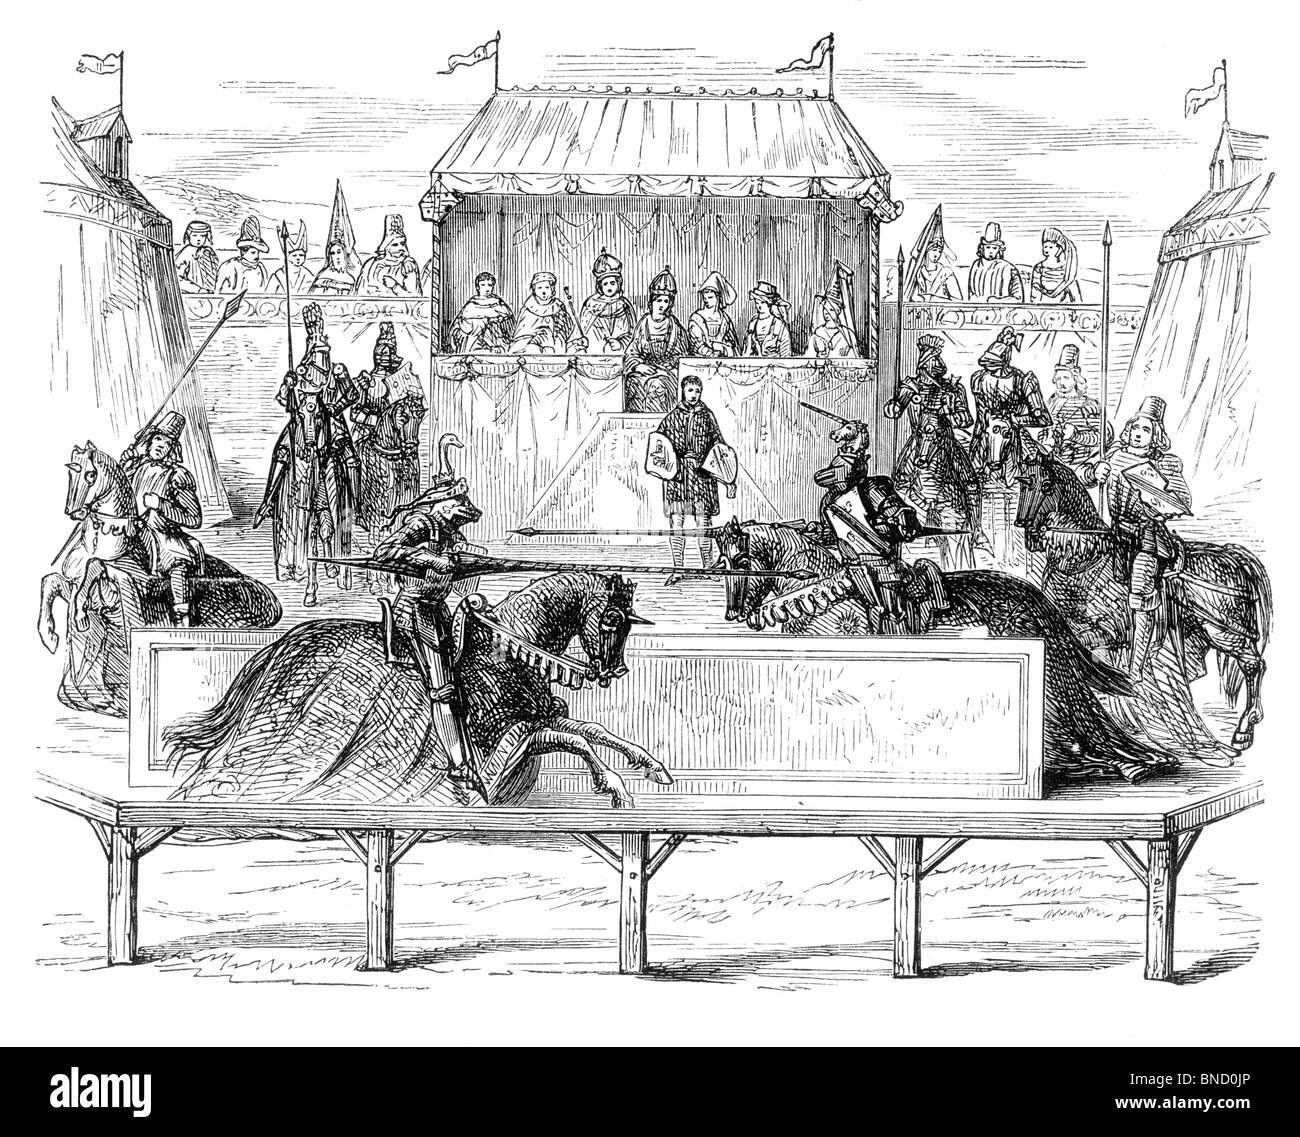 Black and White Illustration of a Medieval Joust Stock Photo